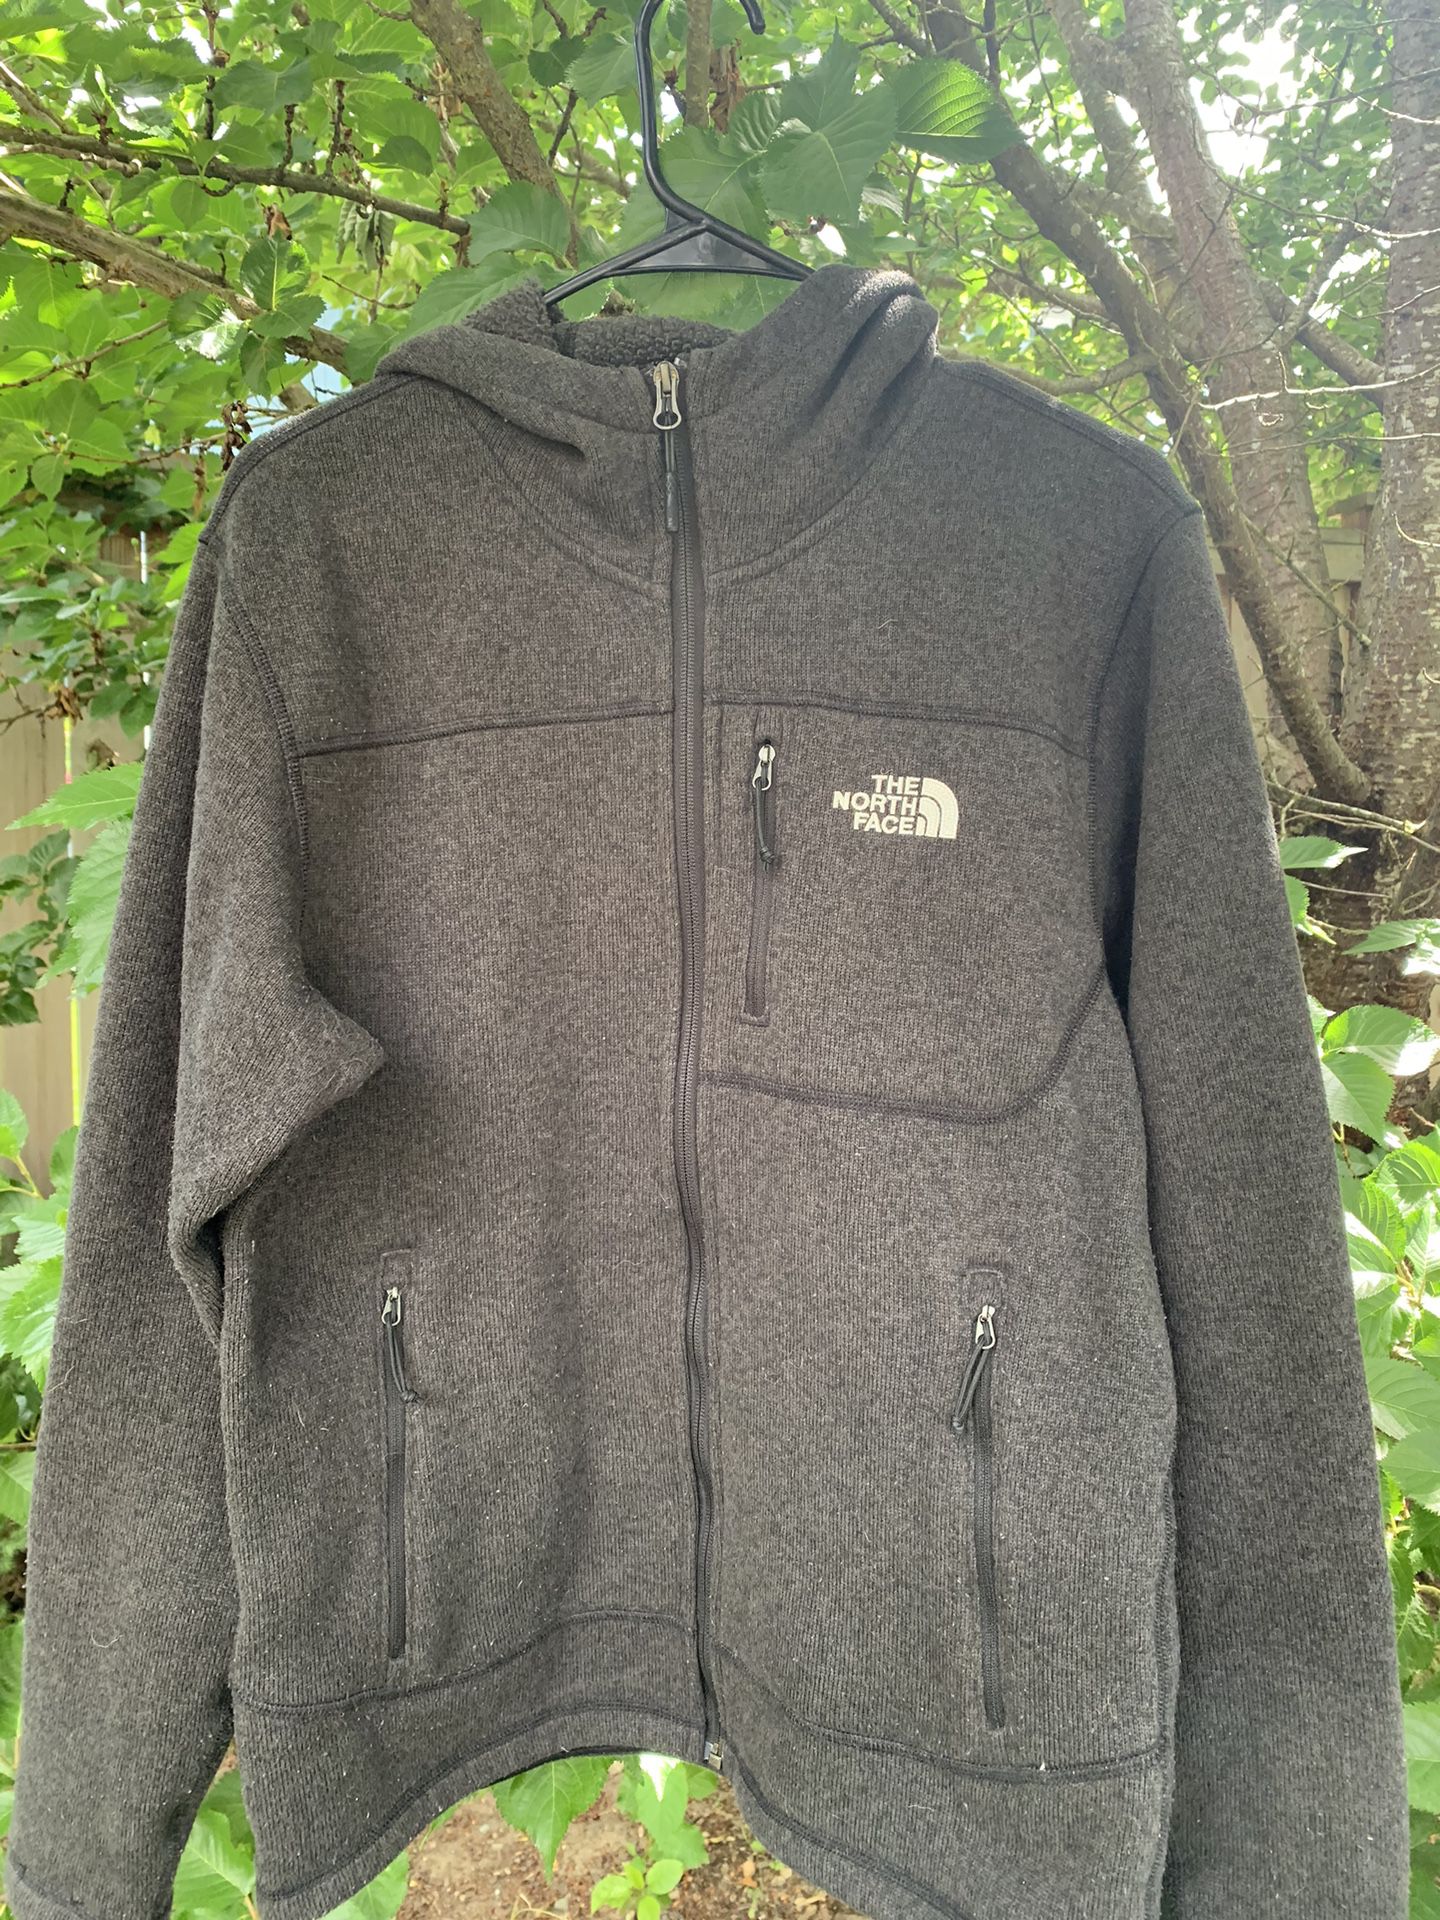 Like new M’s North Face Jacket - Size Small